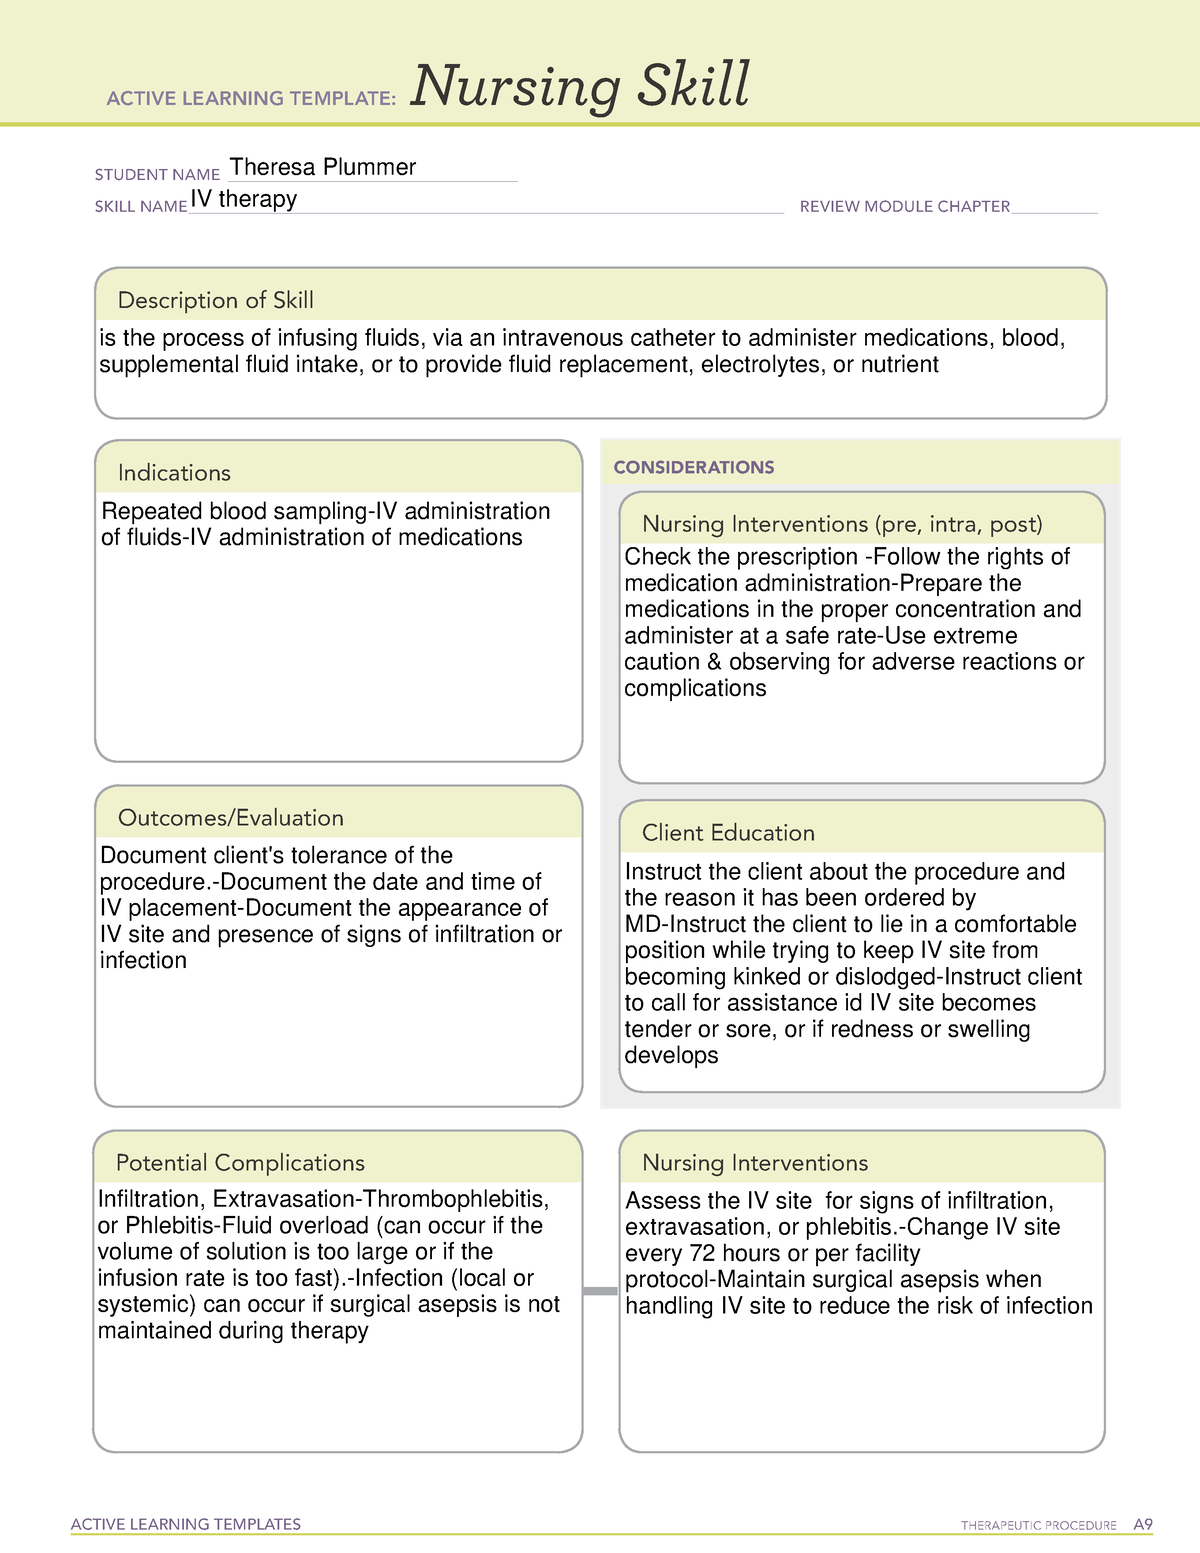 nursing-skill-iv-therapy-active-learning-templates-therapeutic